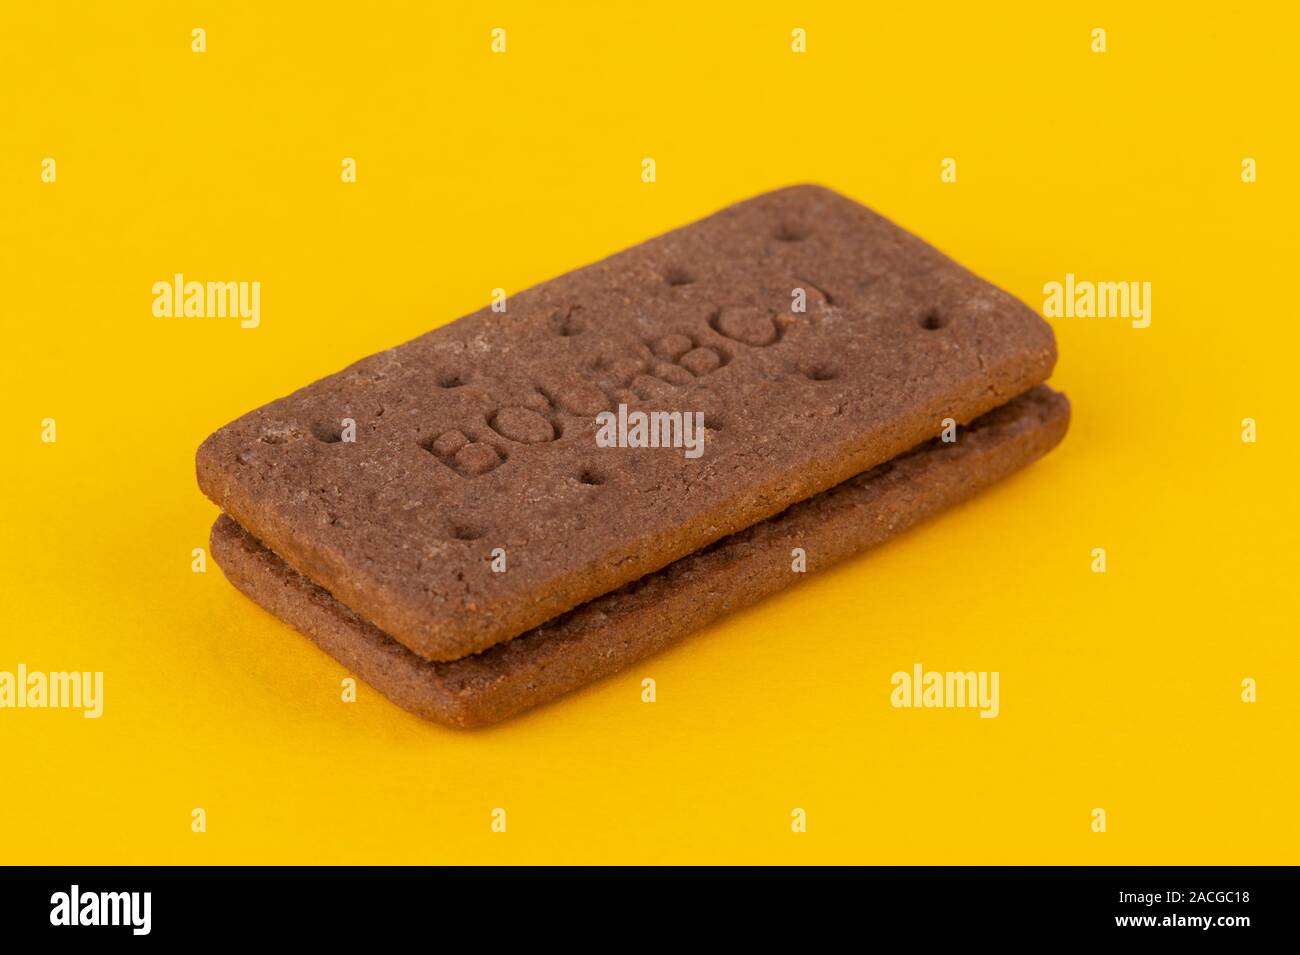 A chocolate Bourbon biscuit shot on a yellow background. Stock Photo